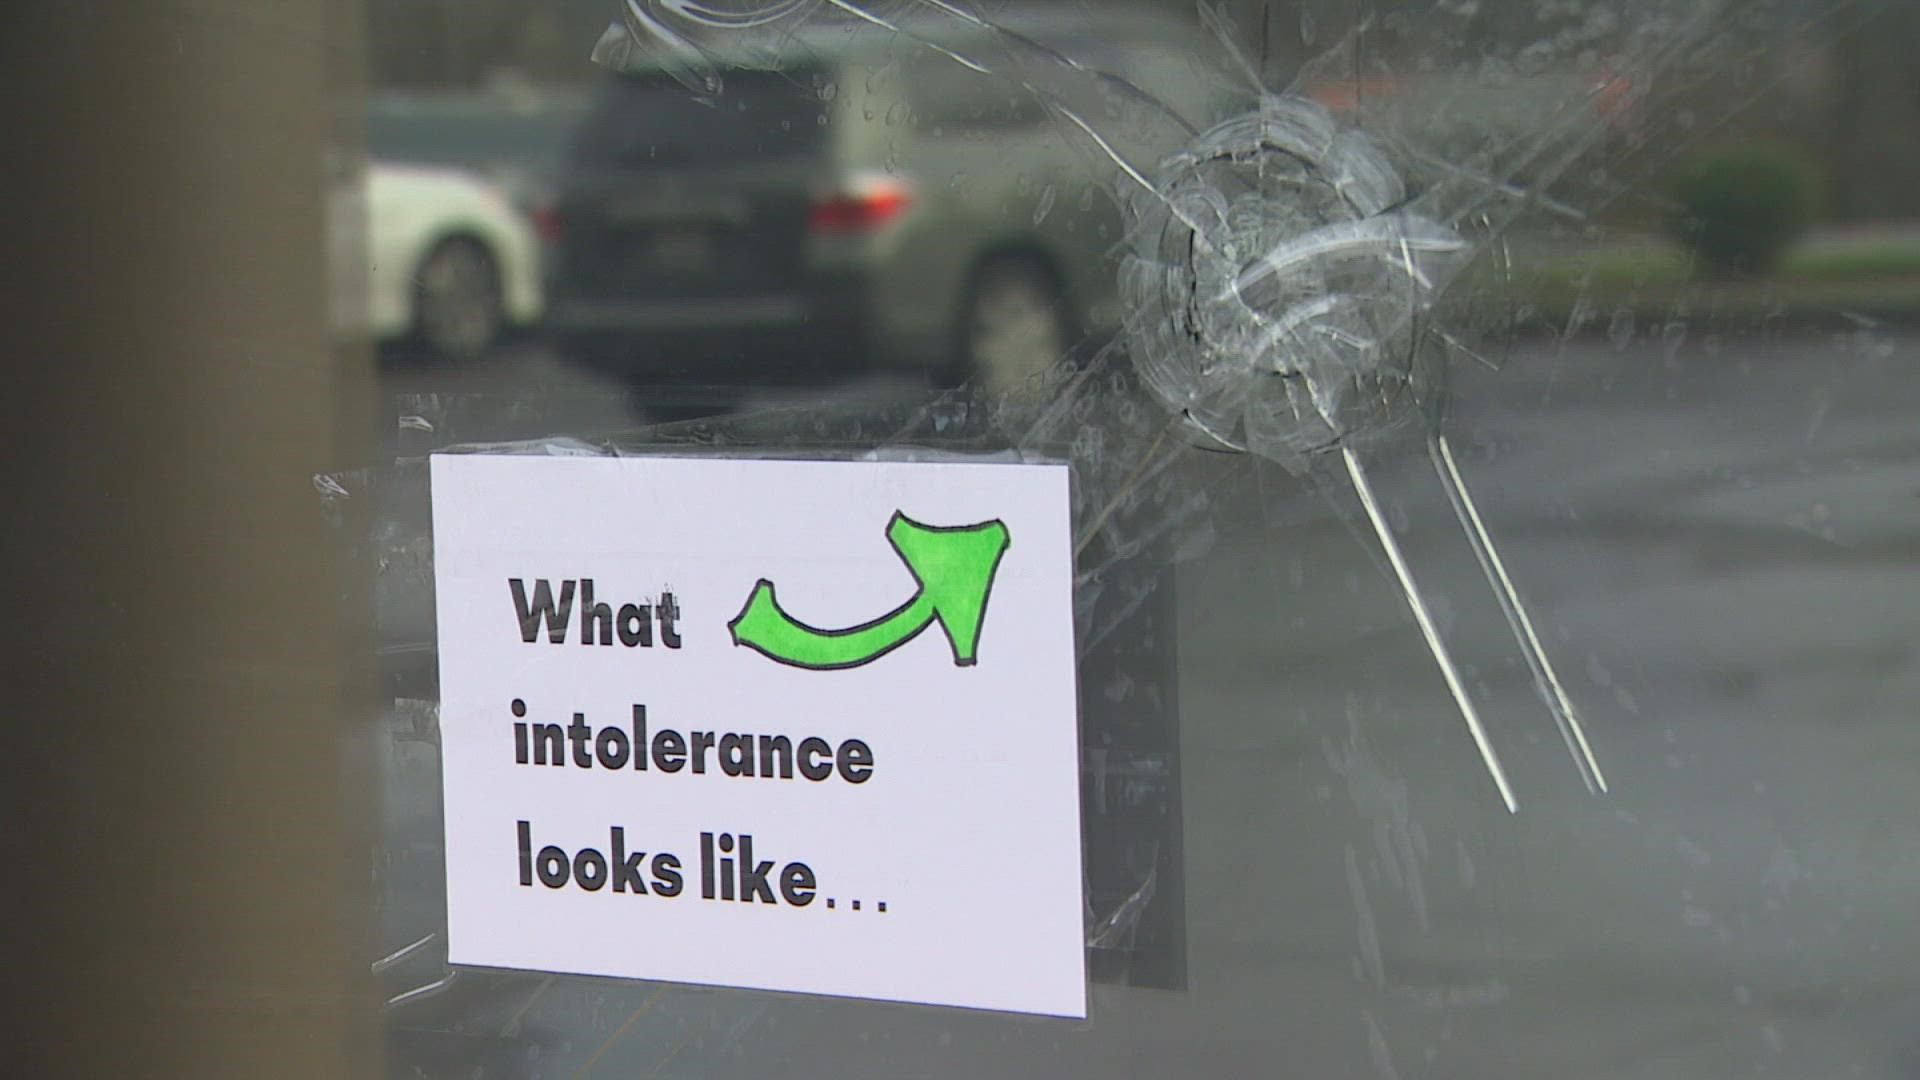 Renton police say they are searching for a suspect after someone shot through the window of a local taproom with a BB or pellet gun ahead of a planned drag event.